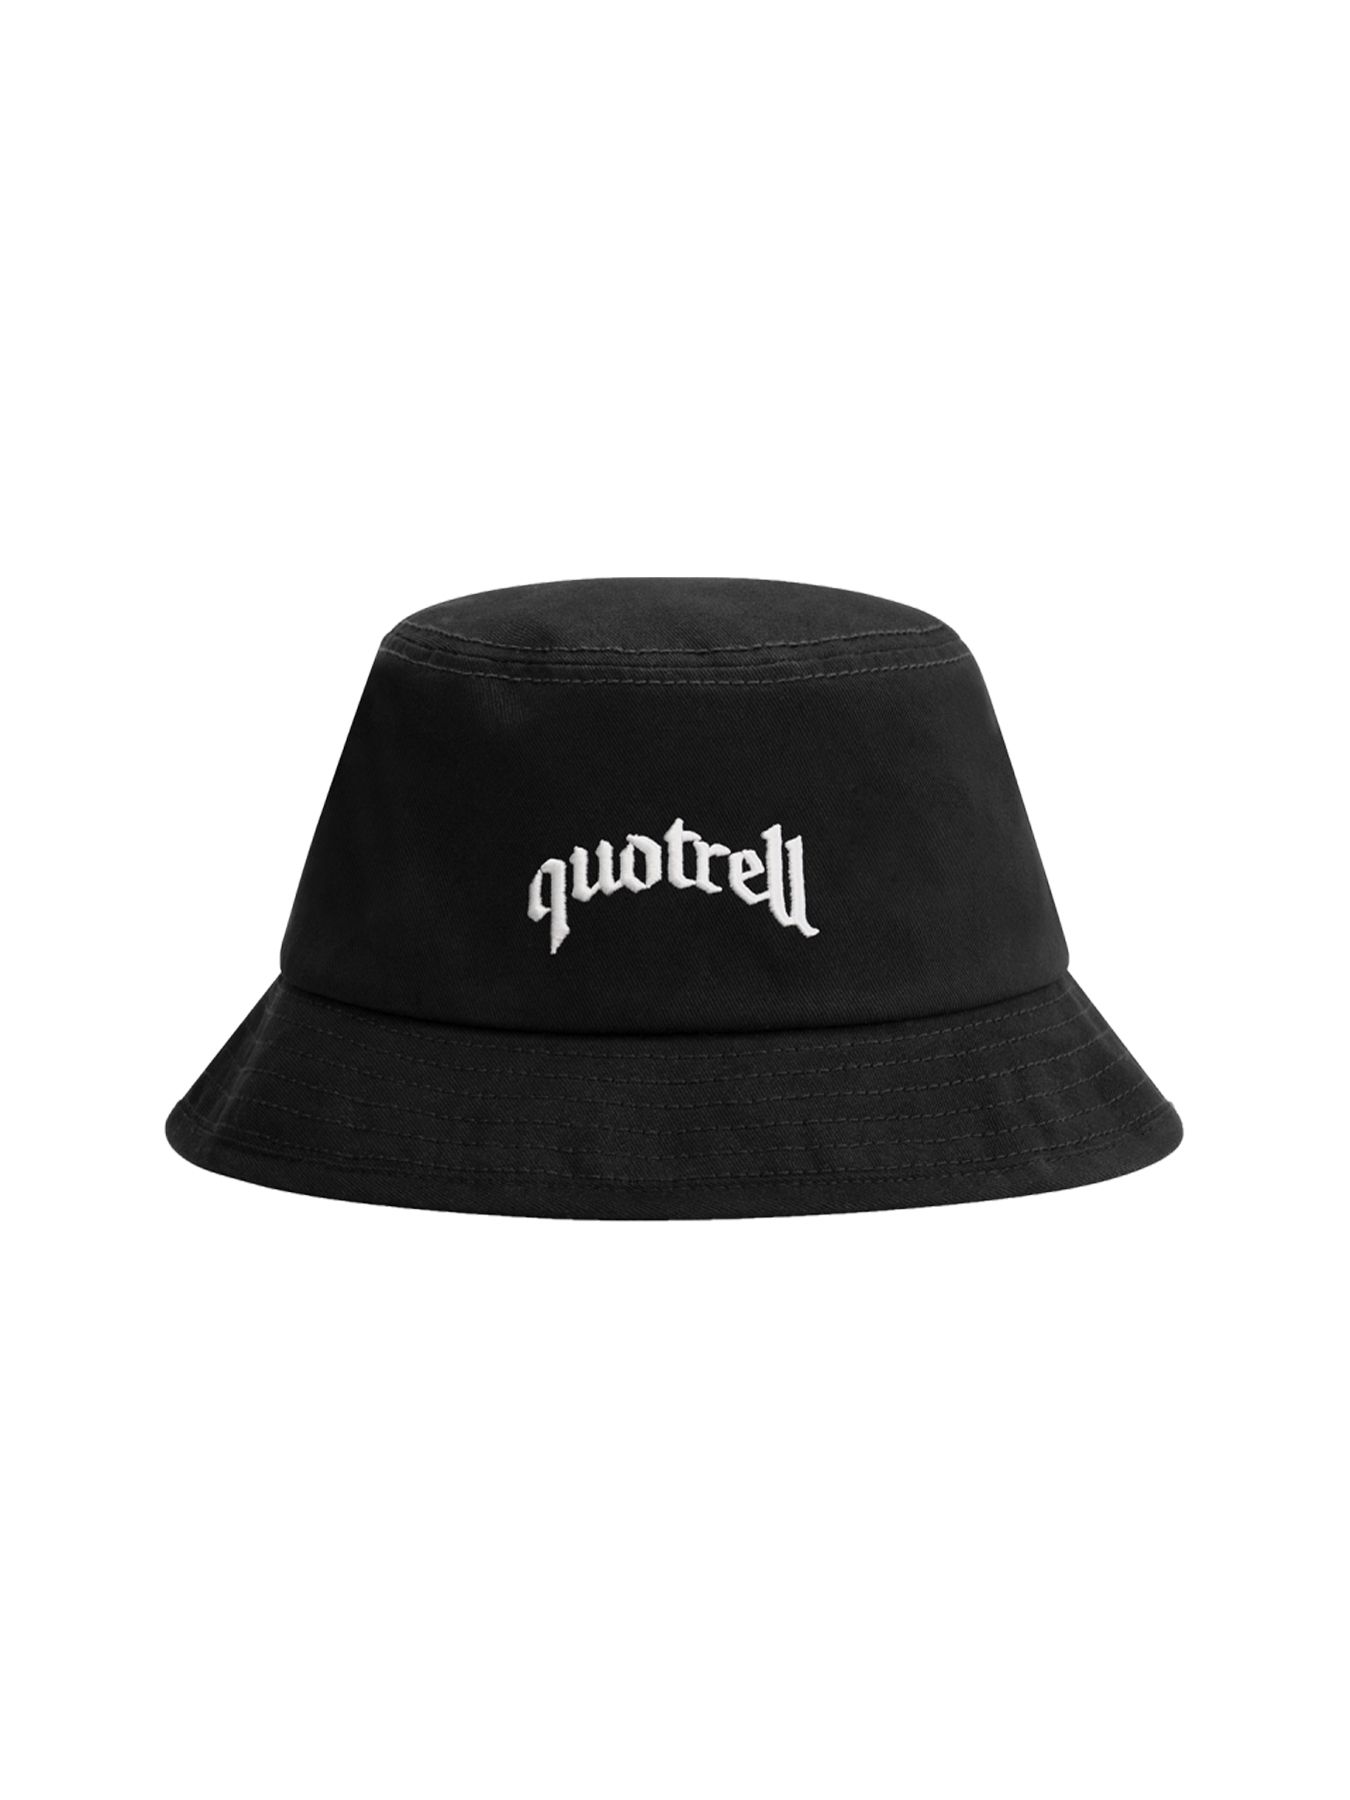 Quotrell Wing Bucket hat Black/White 2900139237019